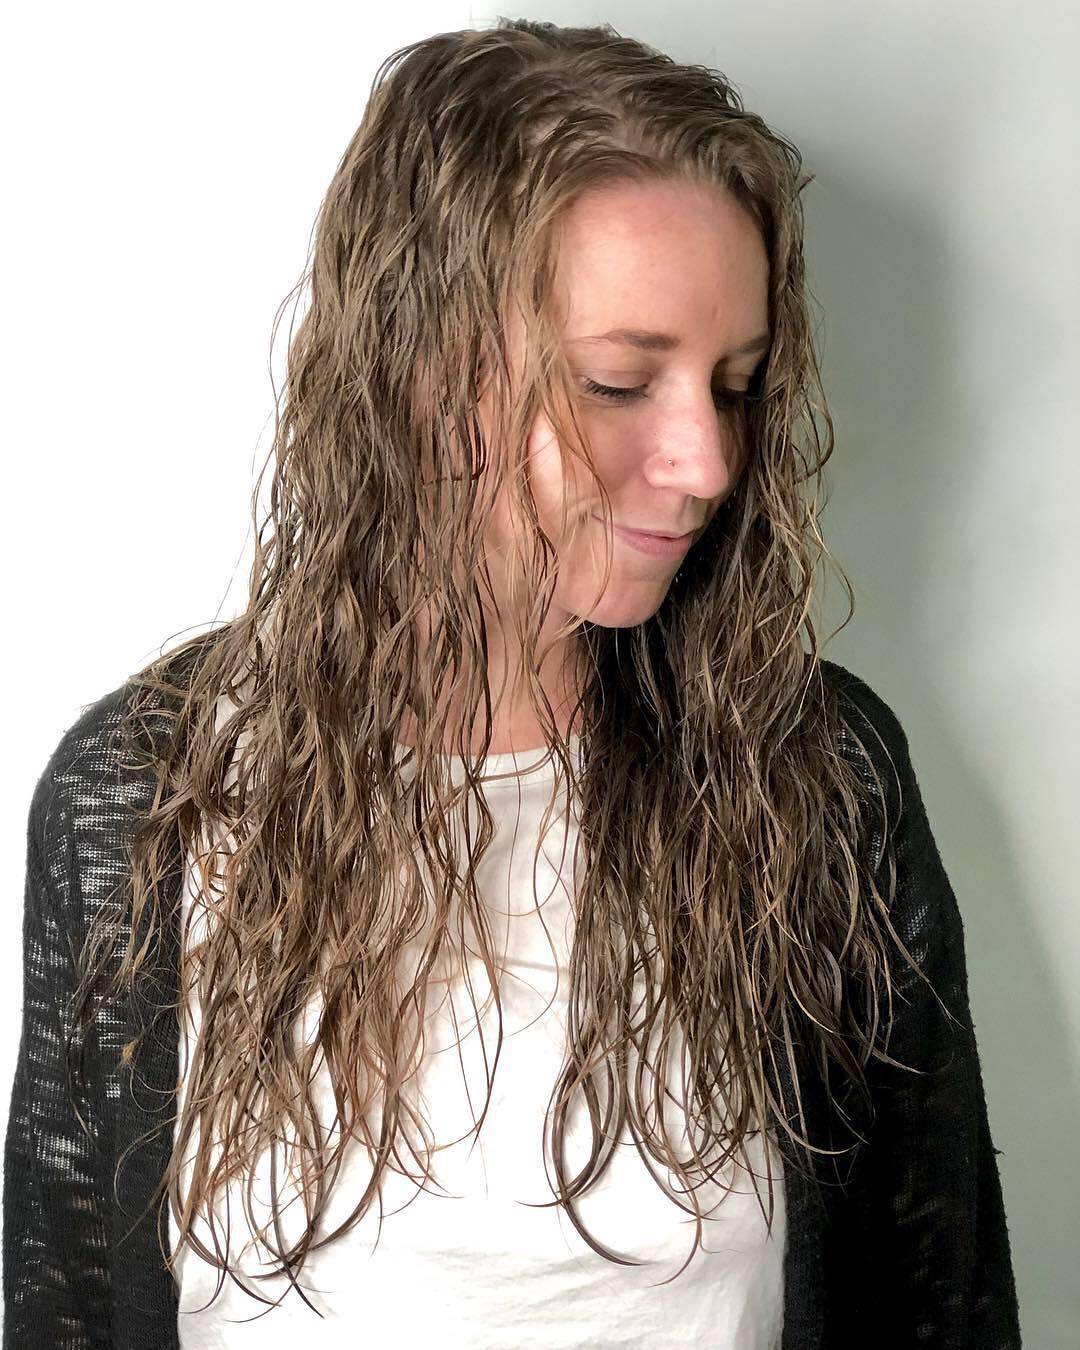 35 Cool Perm Hair Ideas Everyone Will Be Obsessed With in 2021